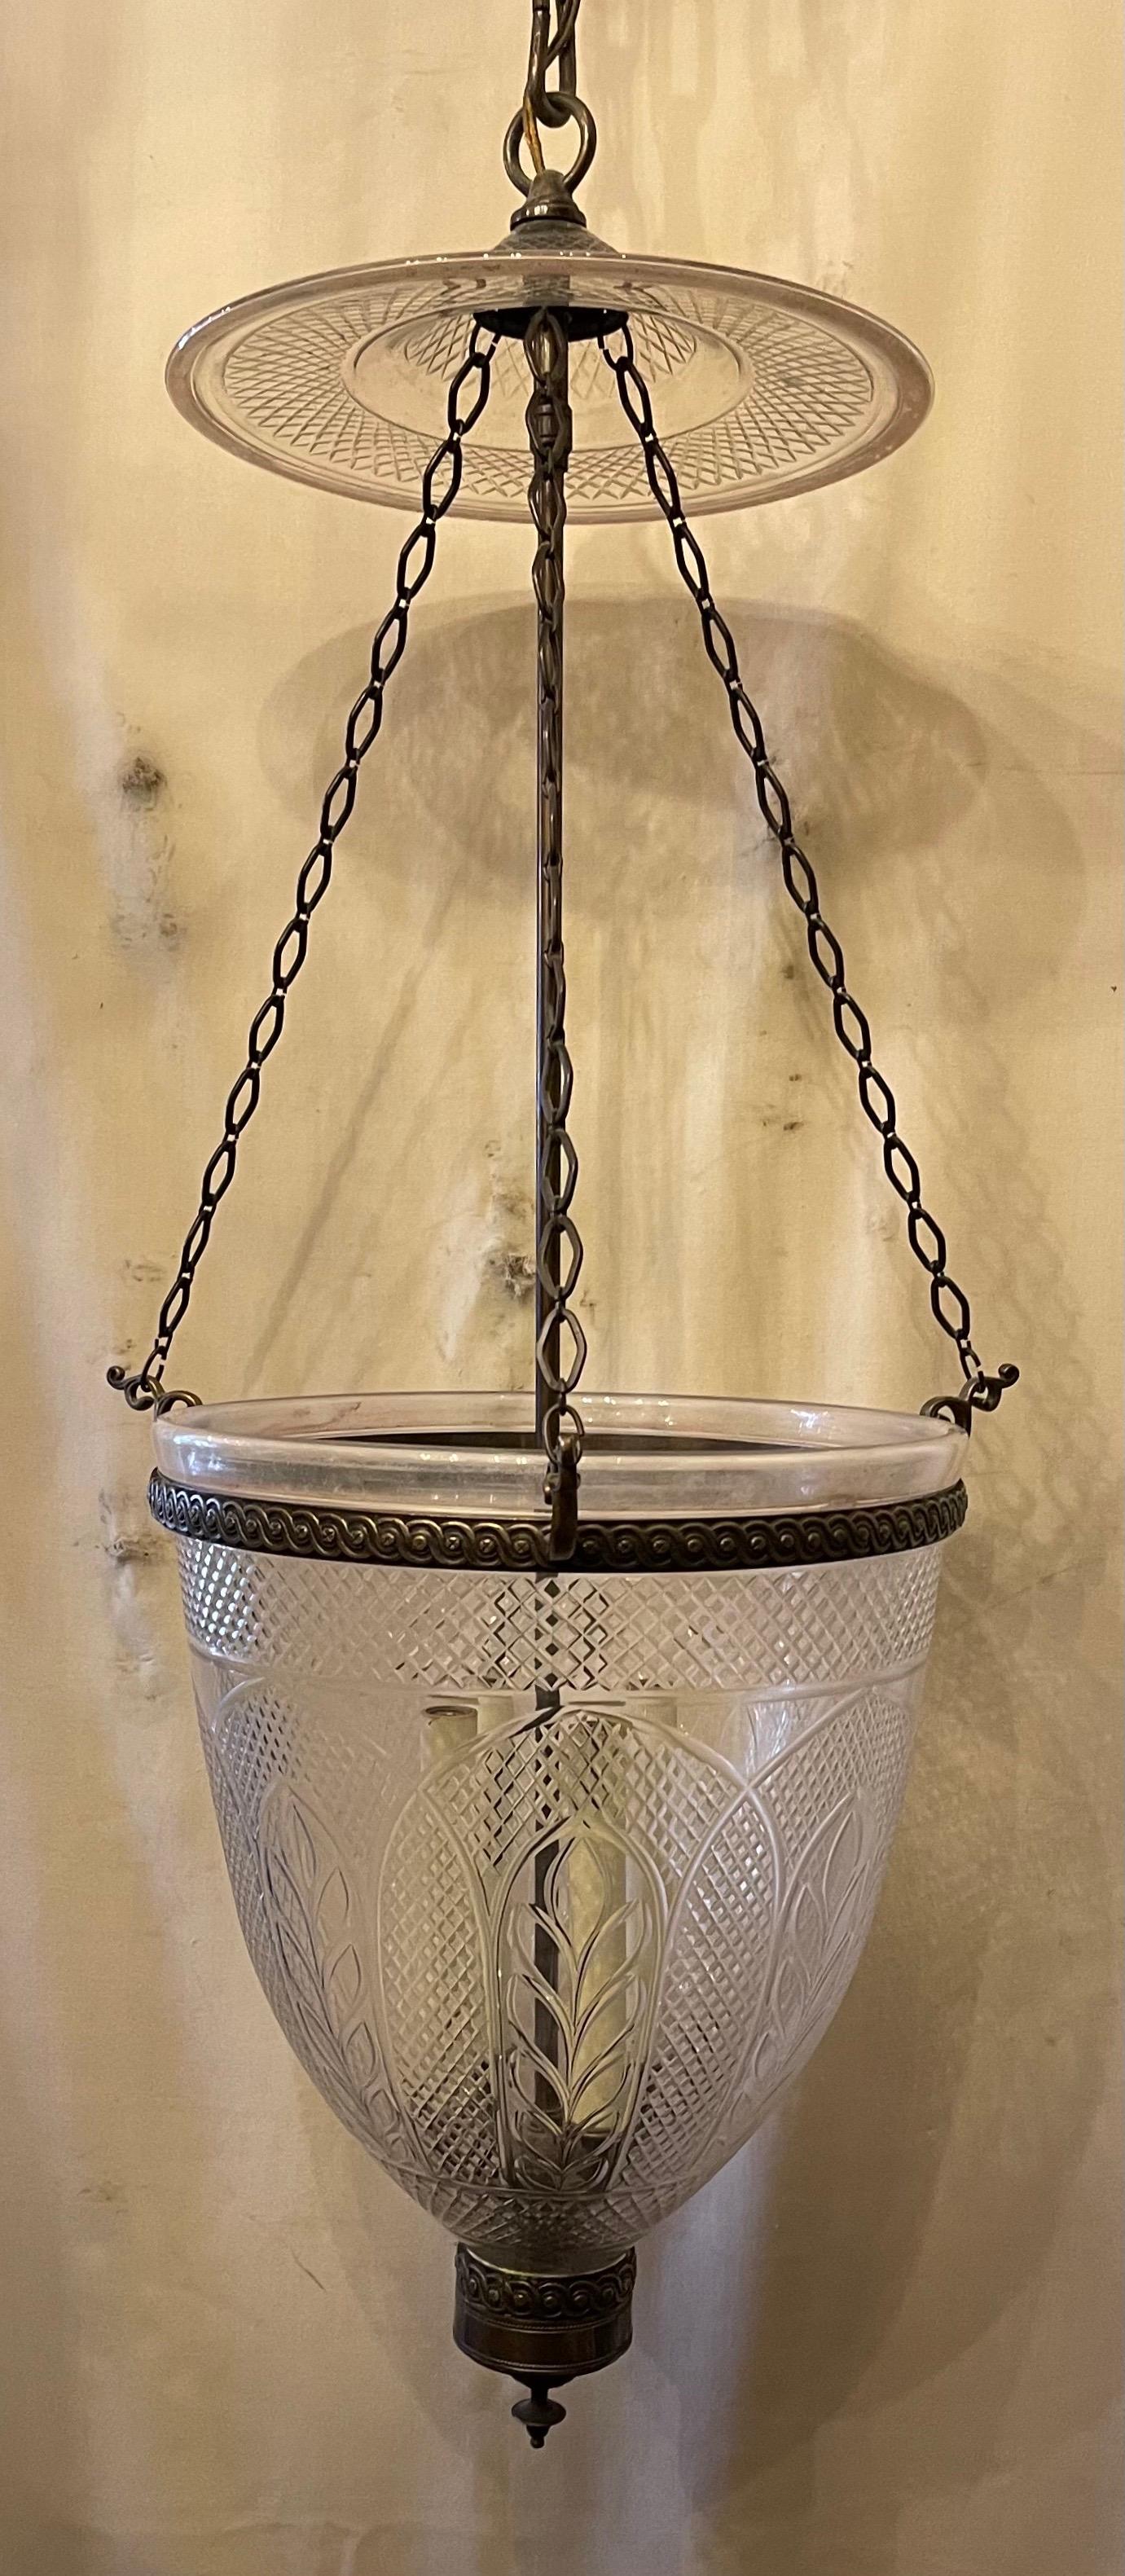 A wonderful large vintage Vaughan lighting etched glass / crystal bell jar lantern in a diamond pattern with leaf fern details and bronze housing and decorative chain in the neoclassical / Regency style, this fixture has 4 candelabra internal lights